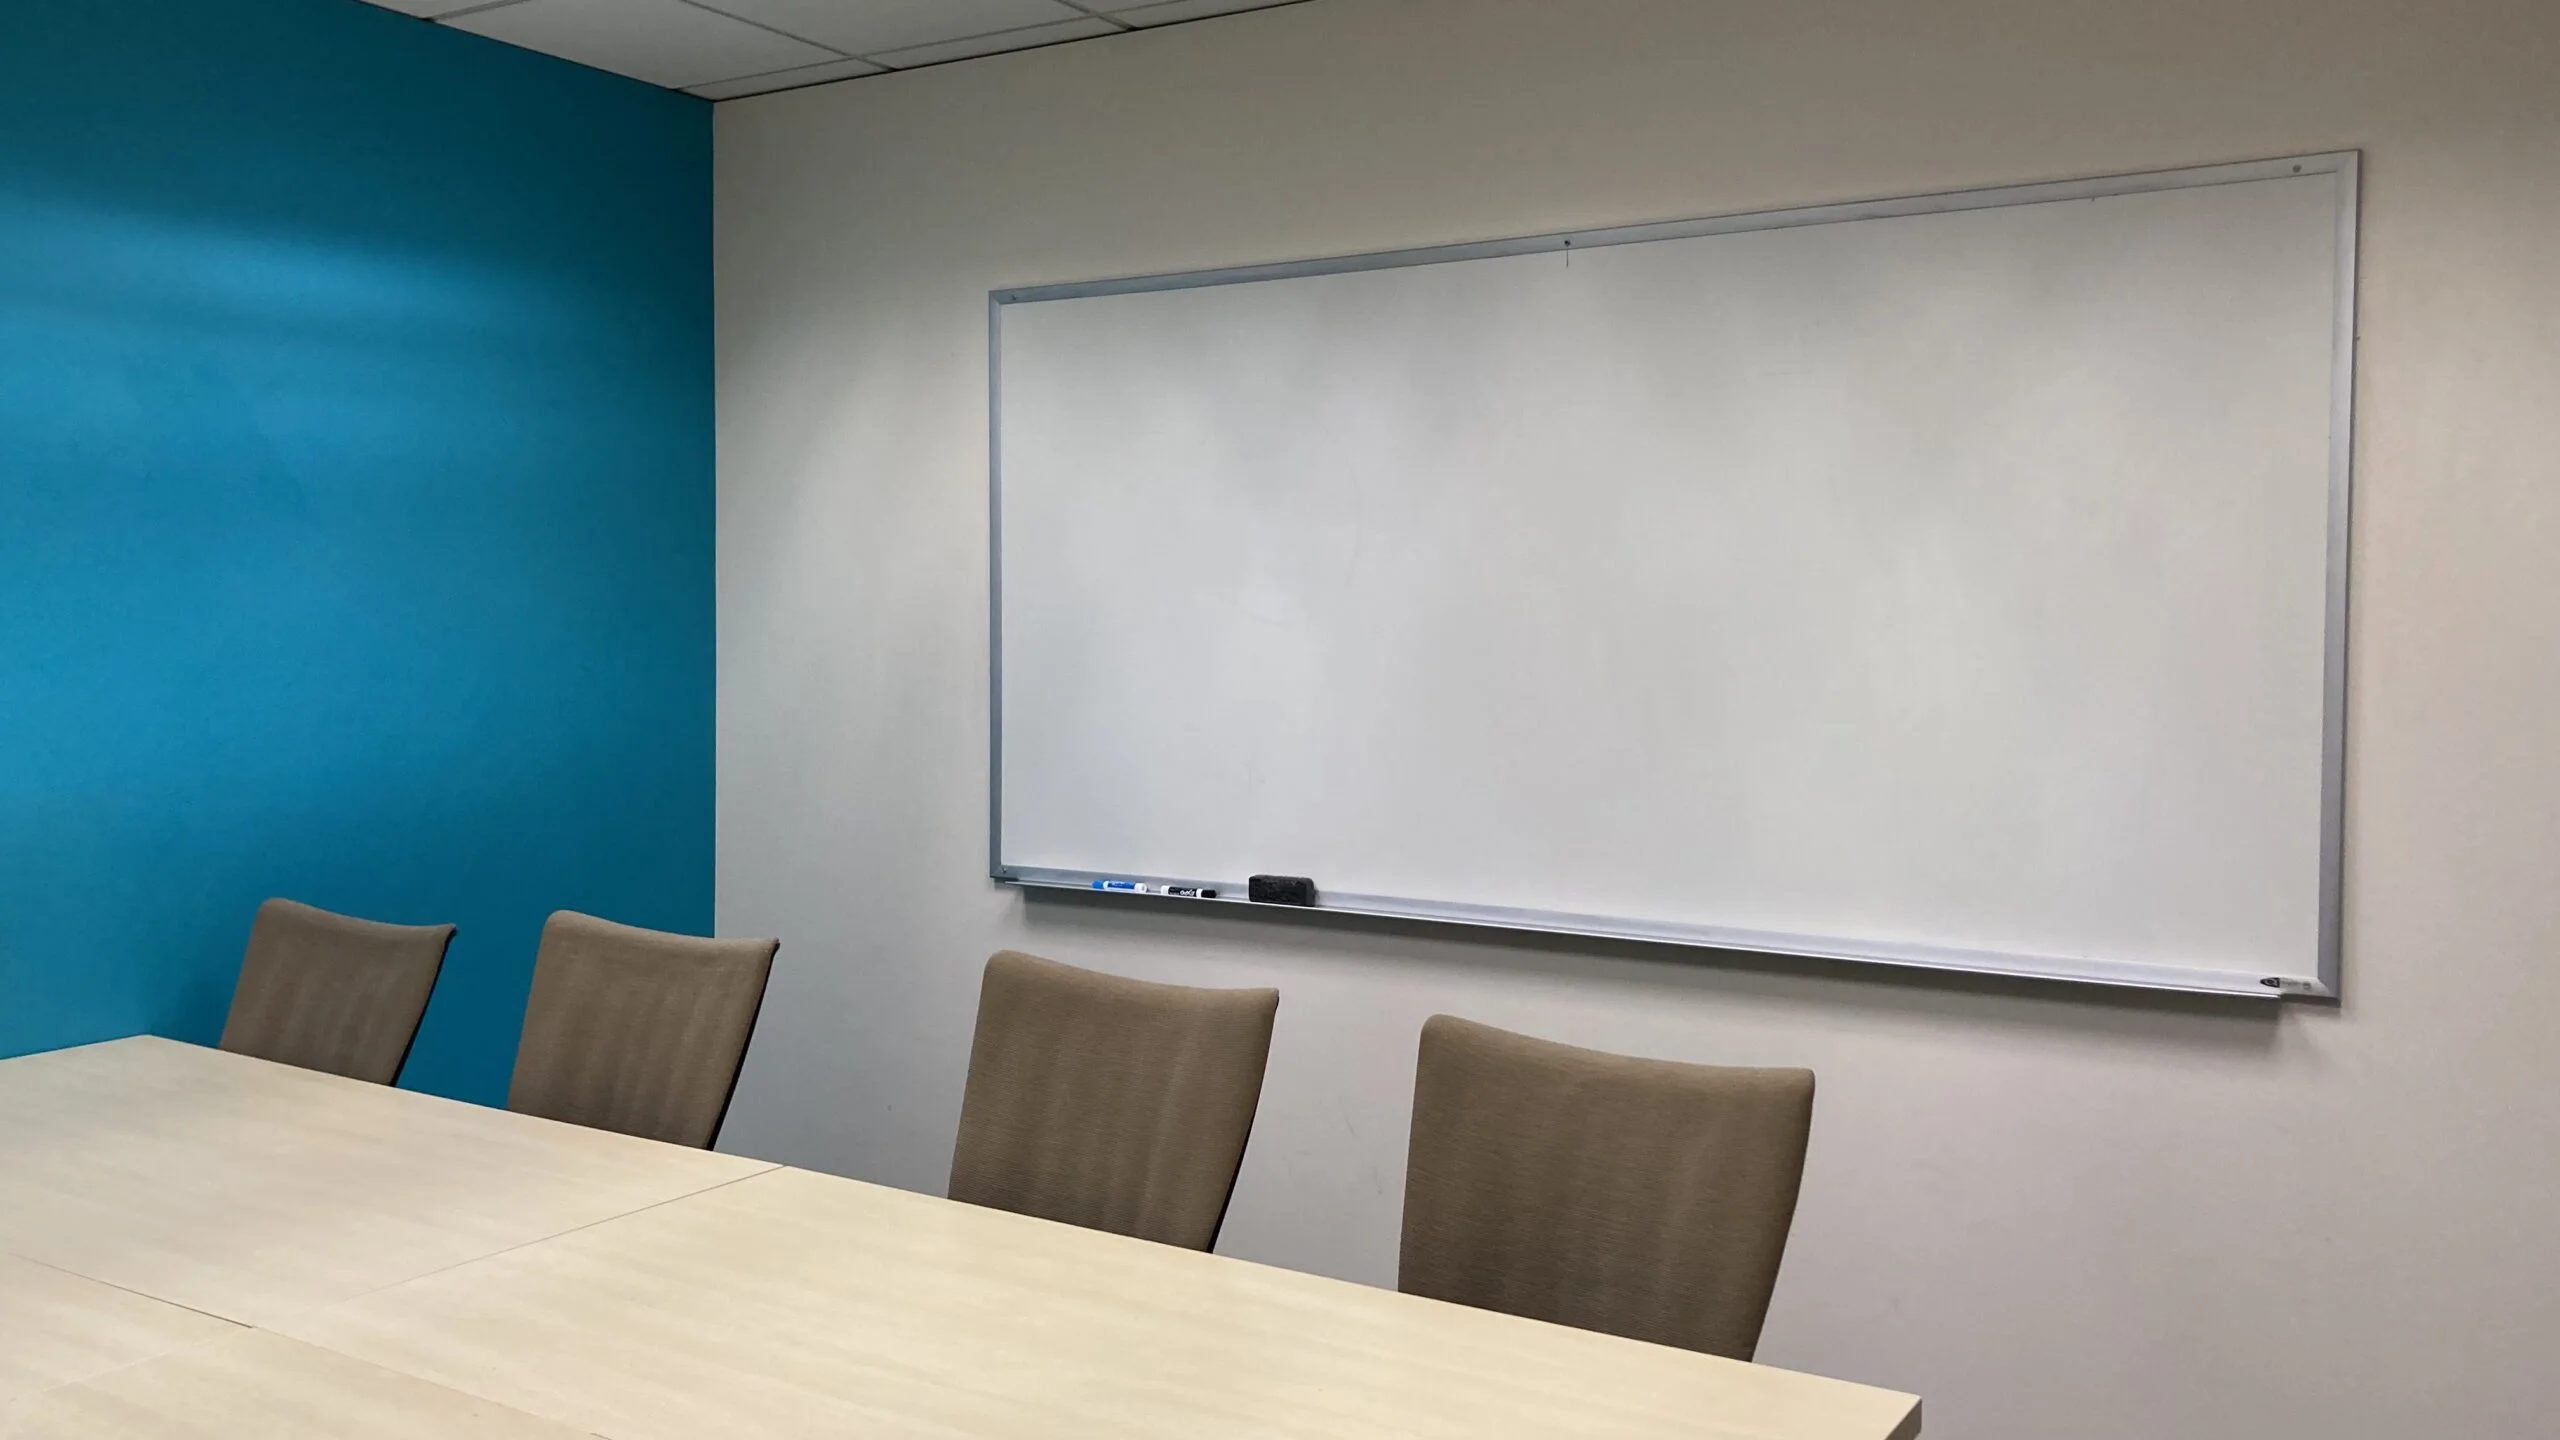 Lanai customizable meeting room for rent by the hour at SURF Incubator in downtown Seattle